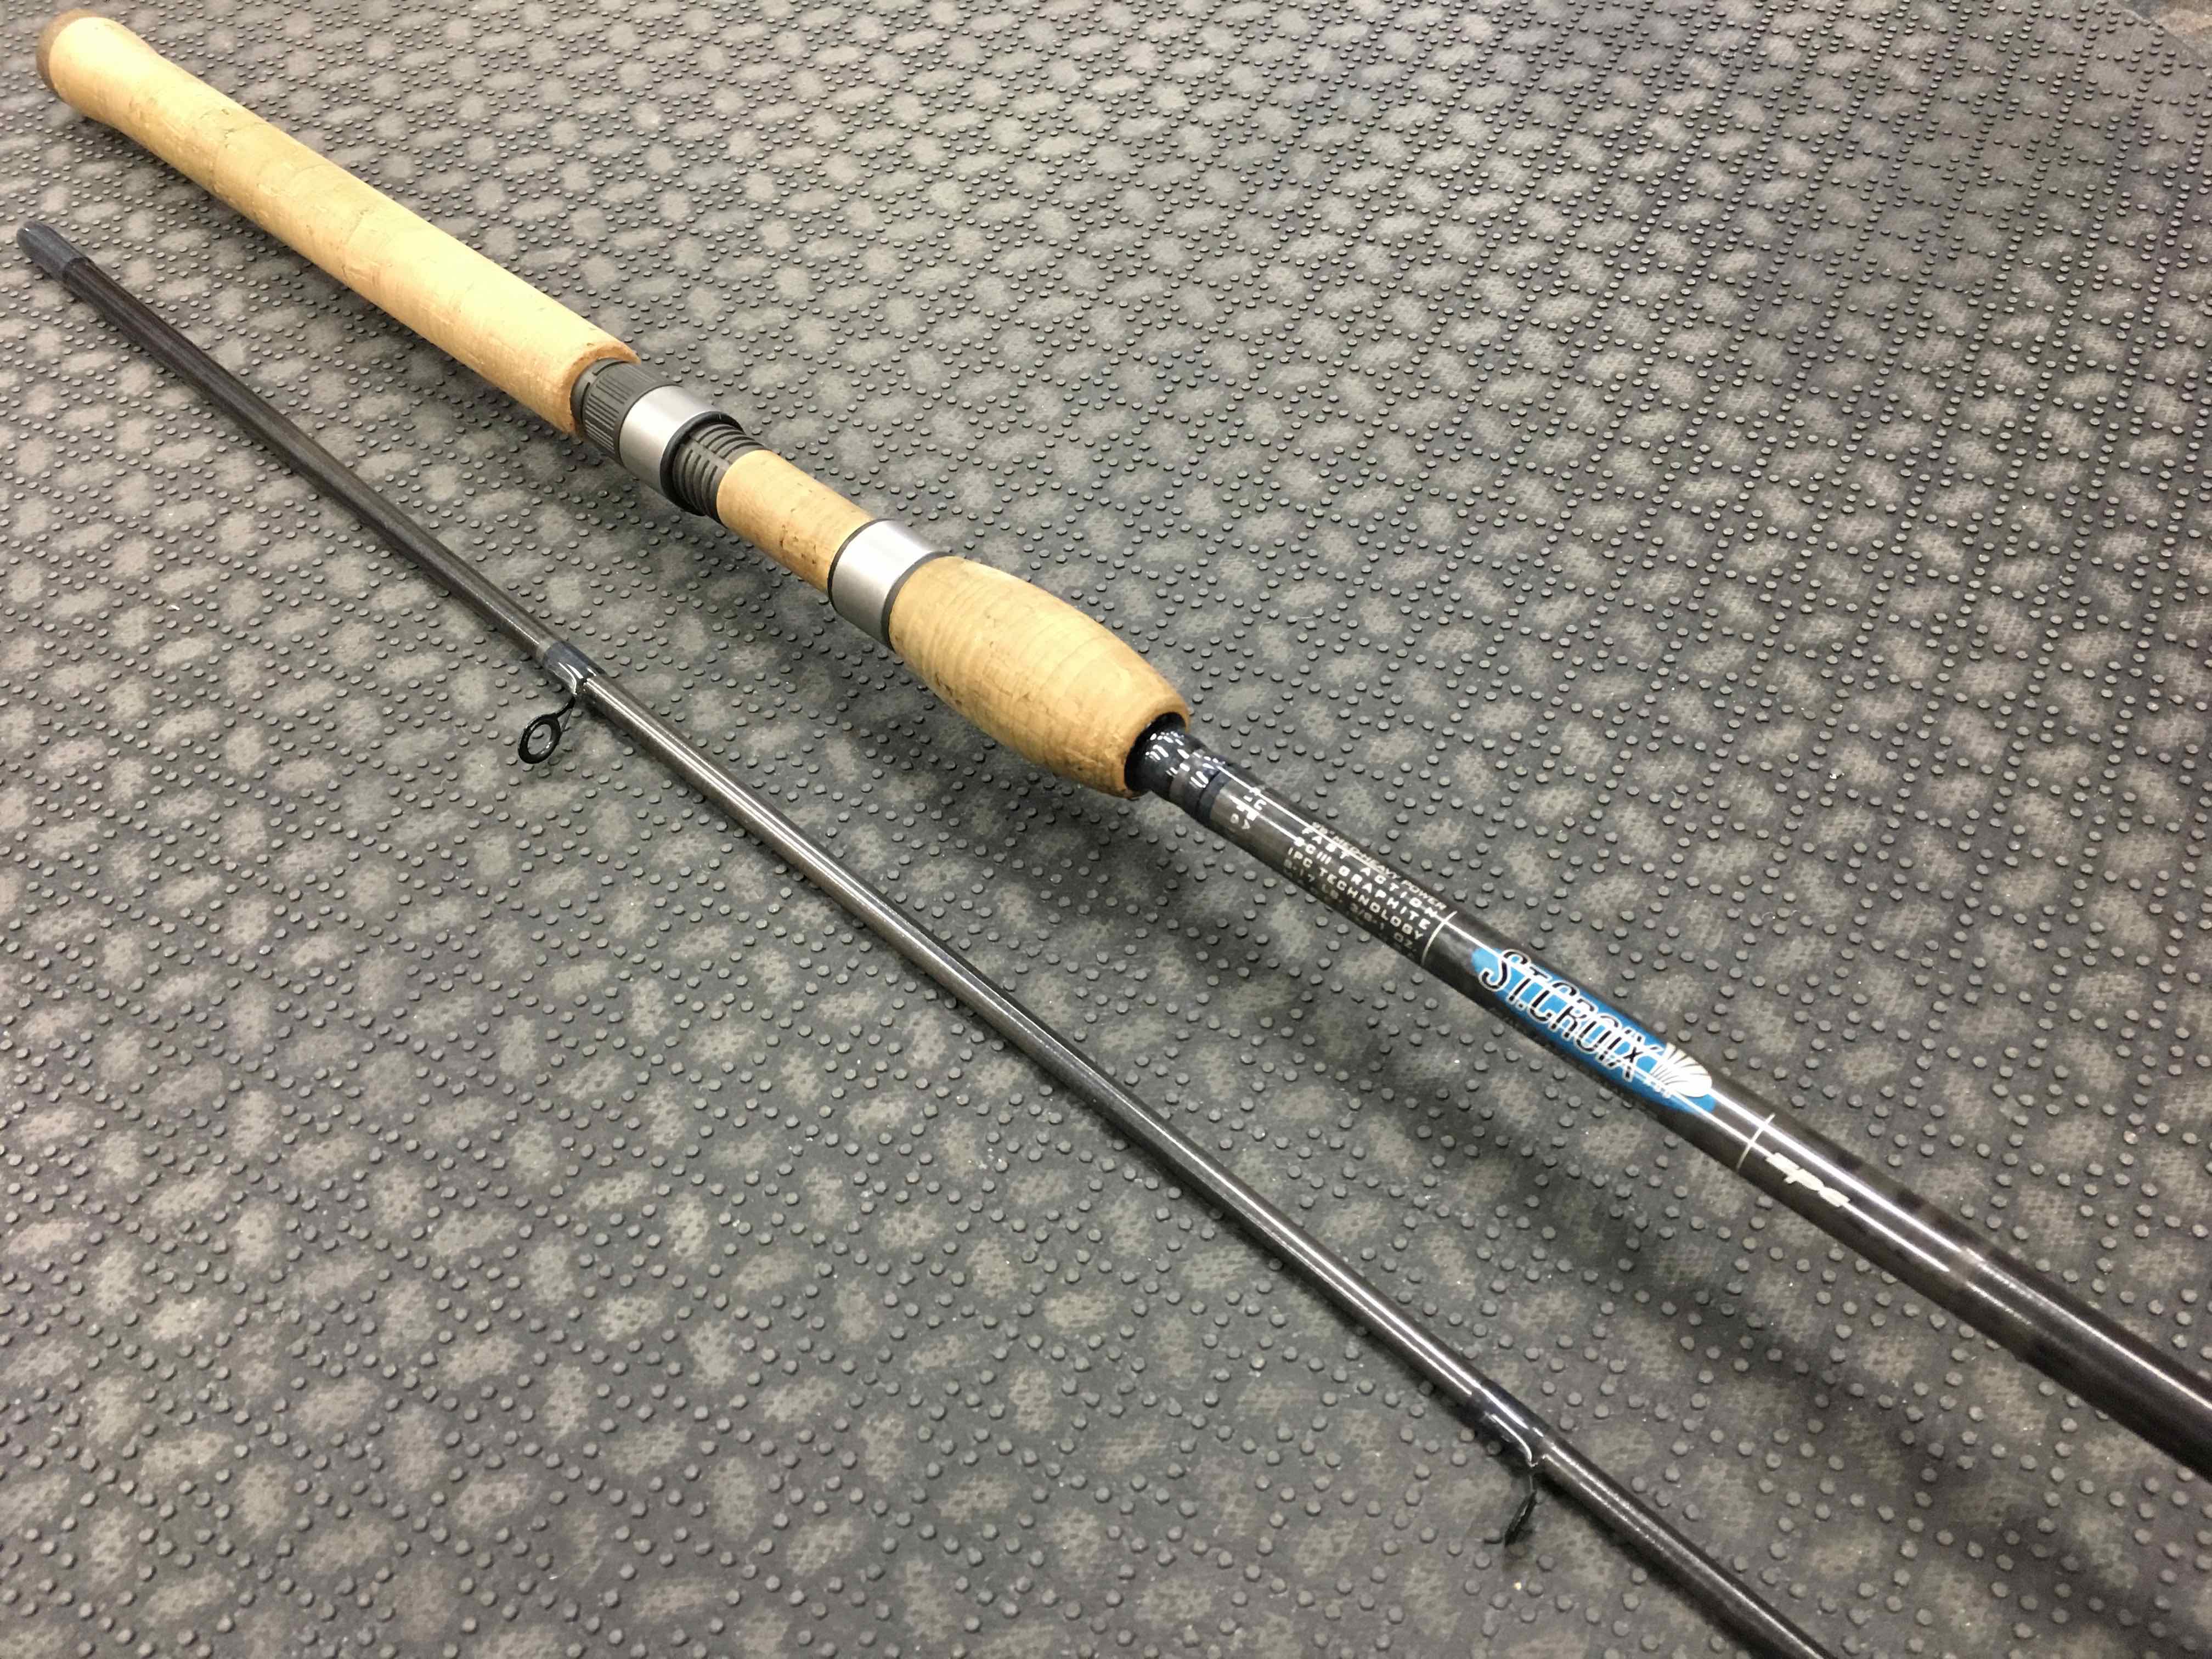 ajf-st-croix-avid-spinning-rod-off-63-www-concordehotels-tr